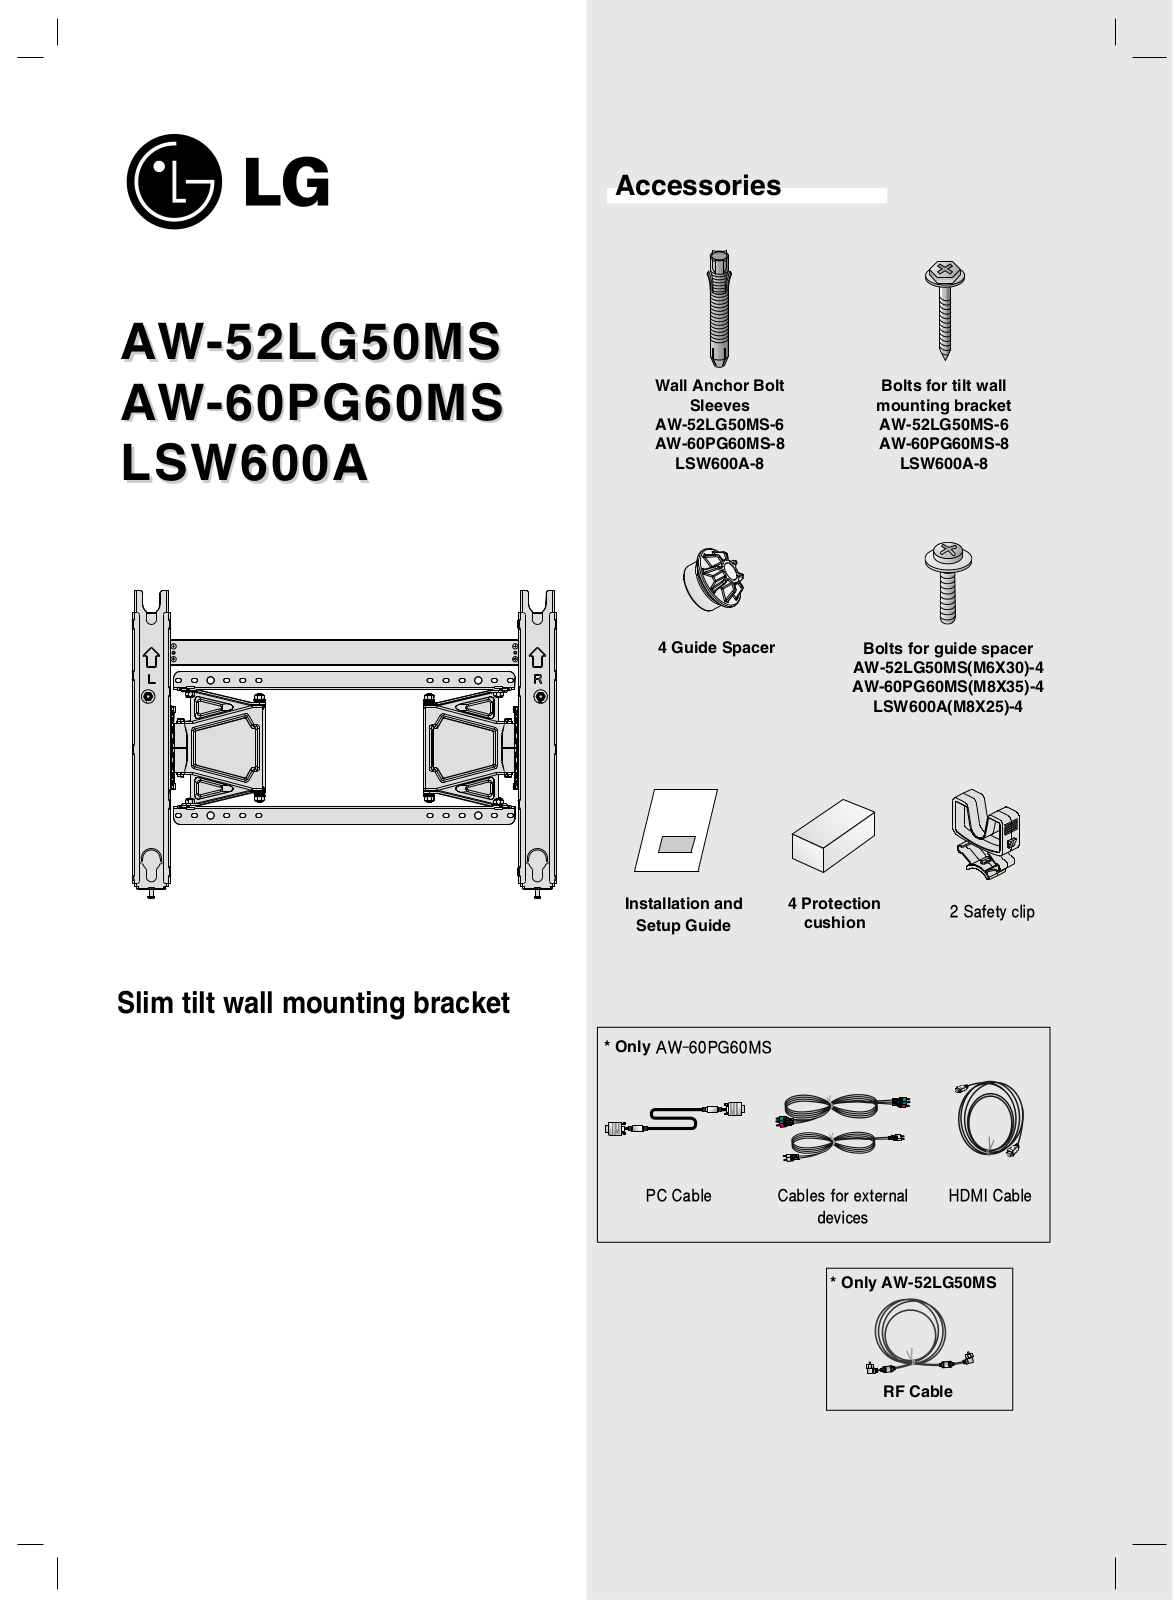 LG AW-60PG60MS Owner’s Manual